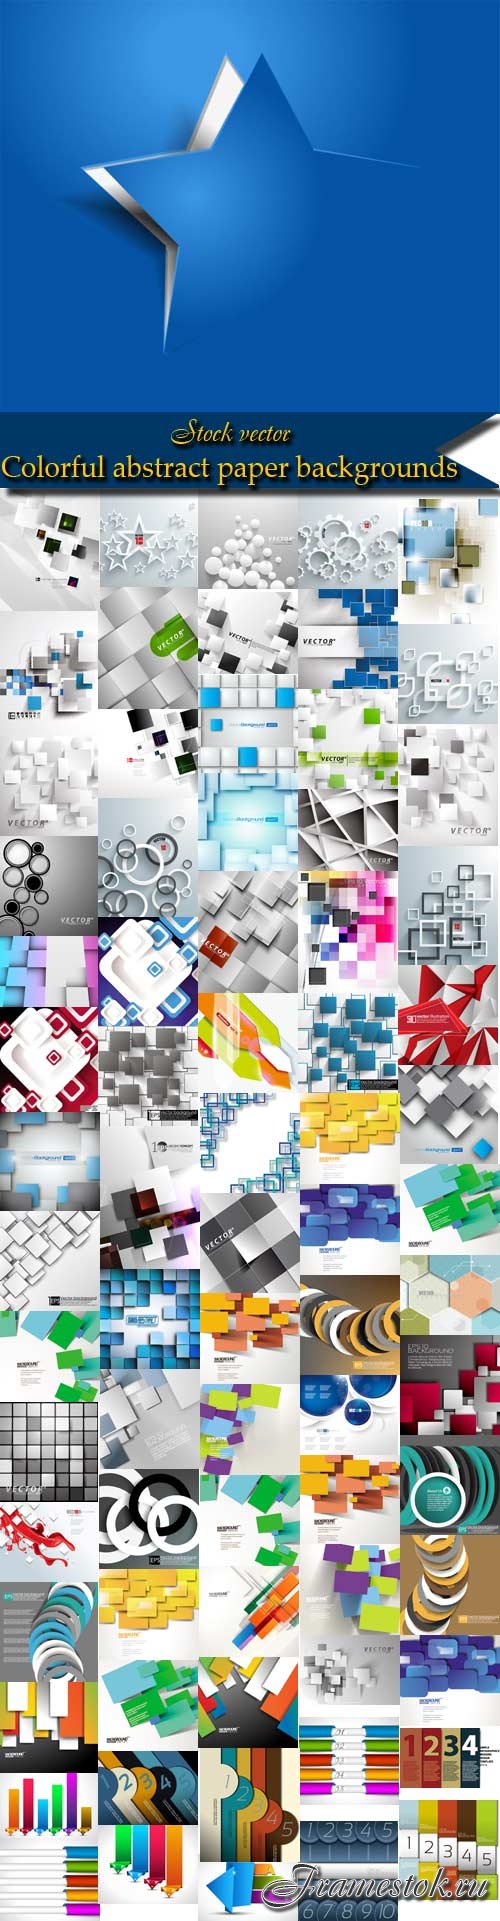 Colorful abstract paper backgrounds